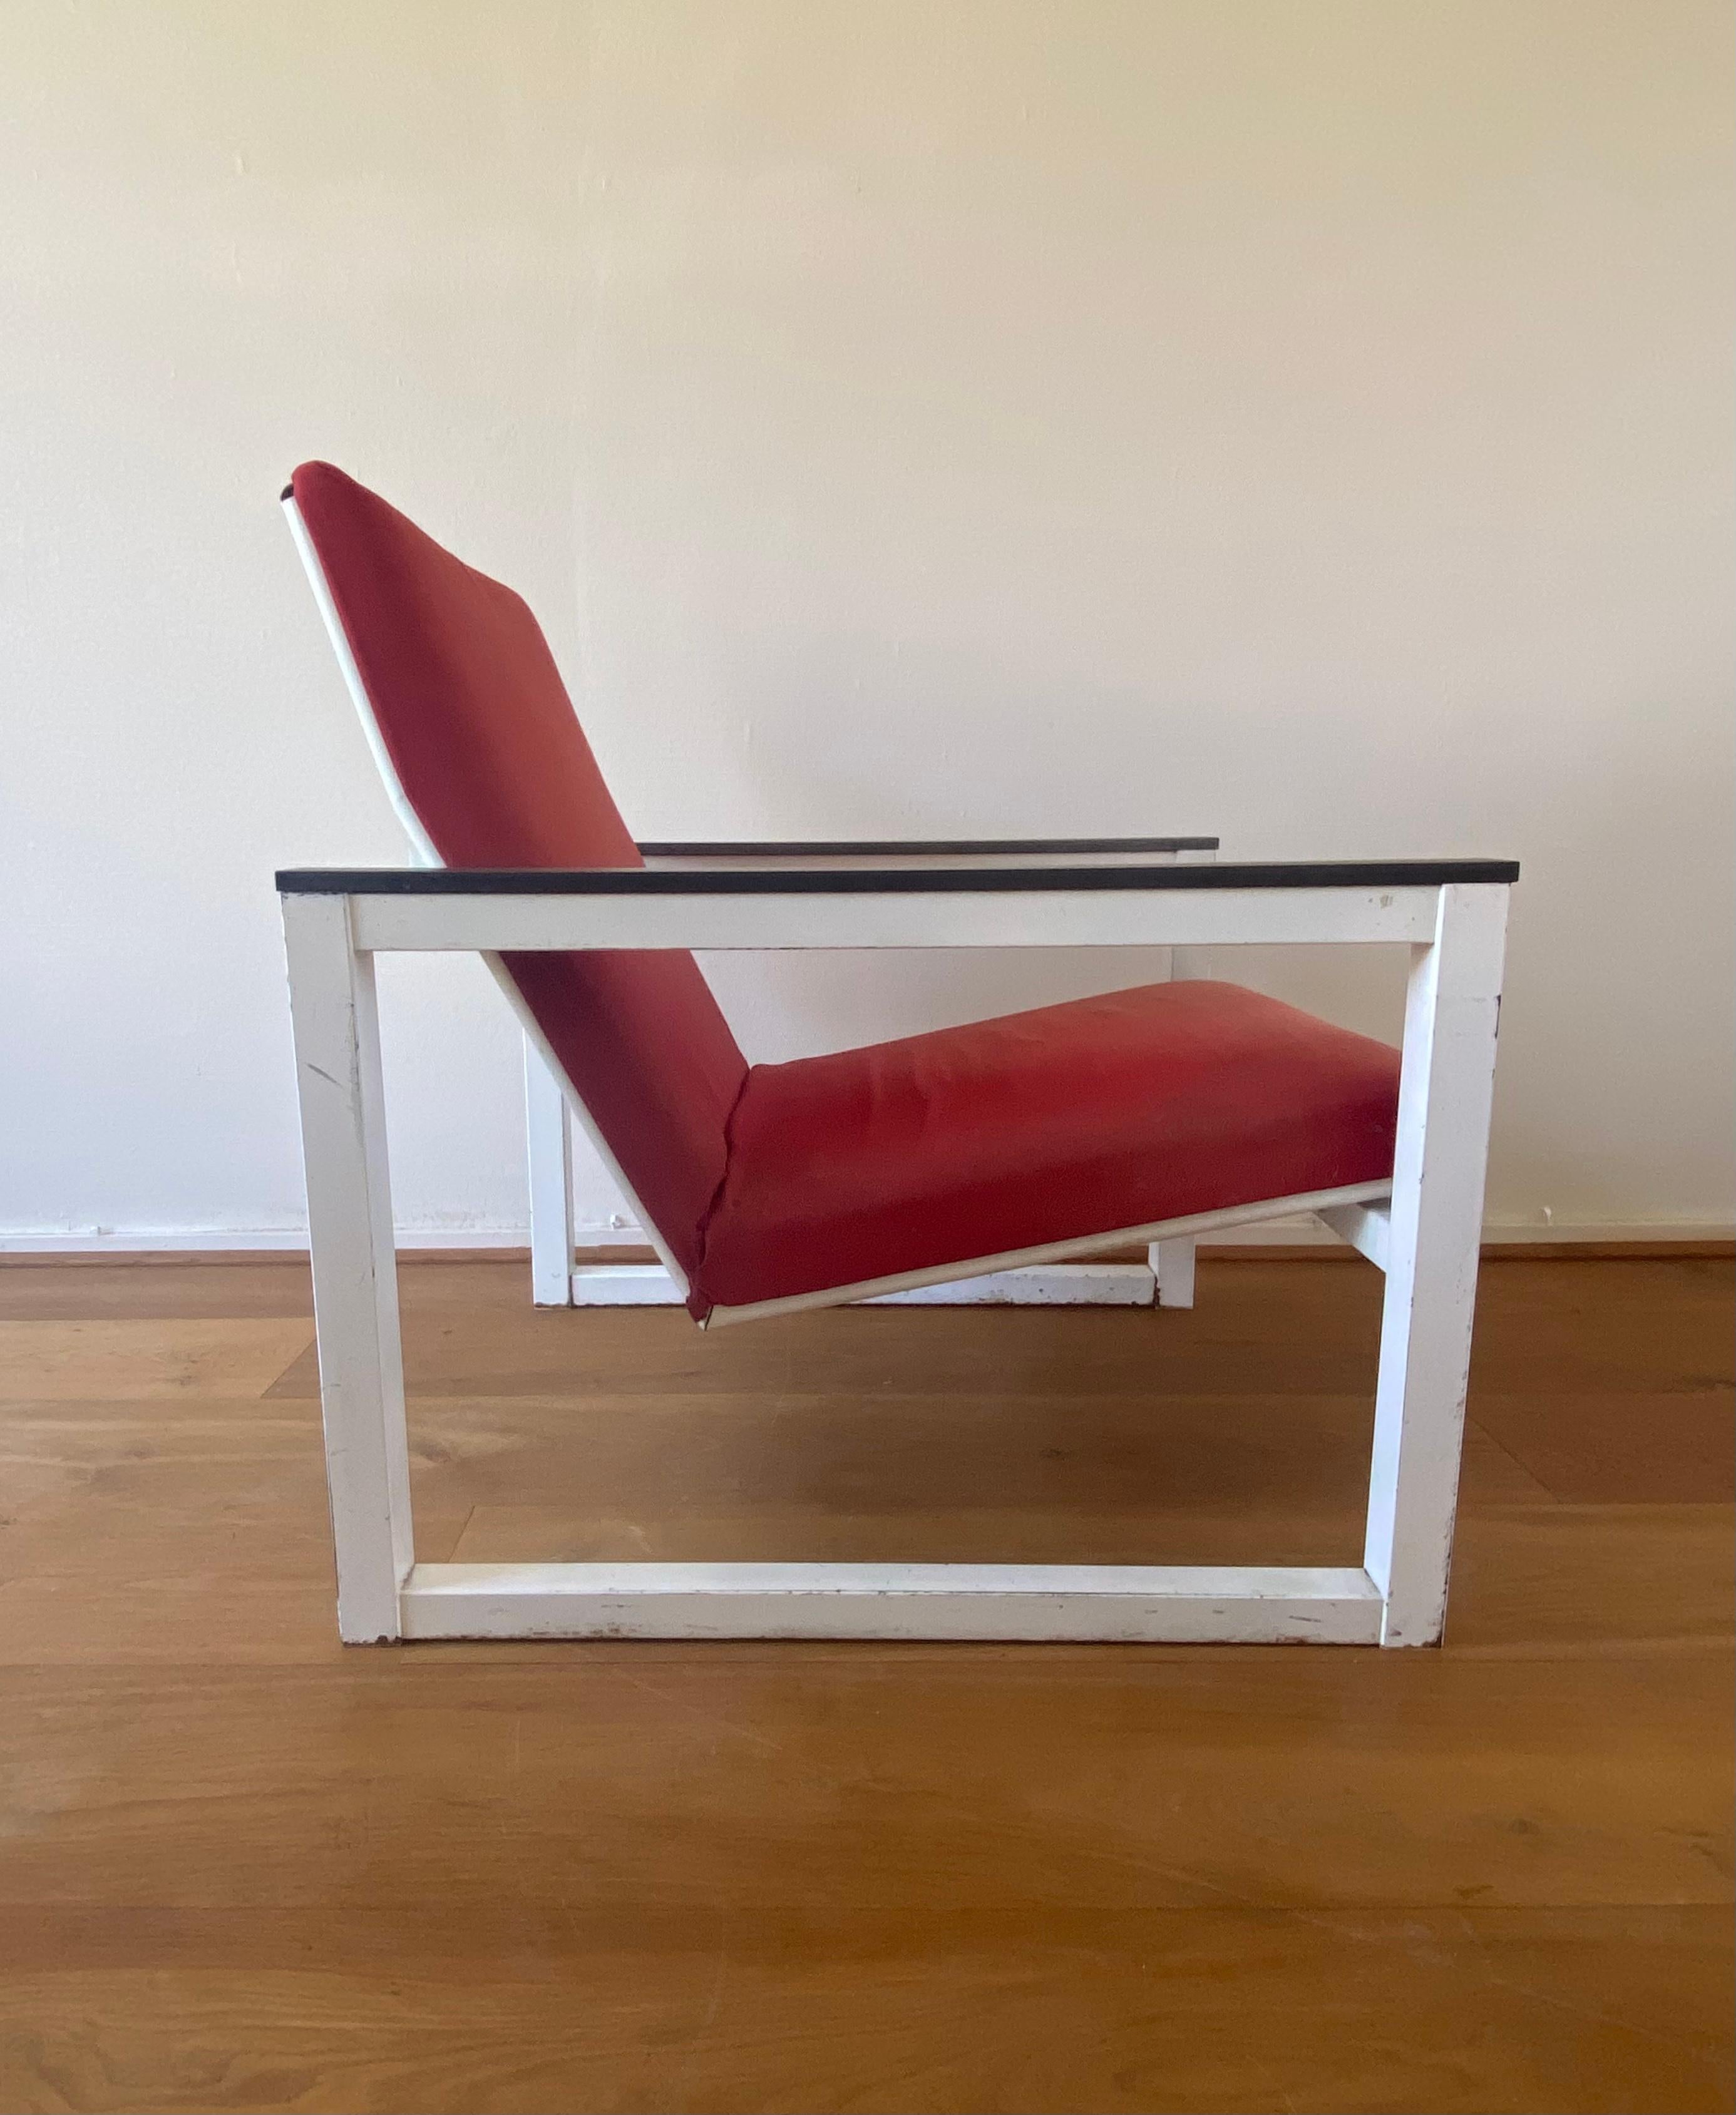 Metal Rare Lounge Chairs by Tjerk Reijenga and Friso Kramer for Pilastro, 1960s For Sale